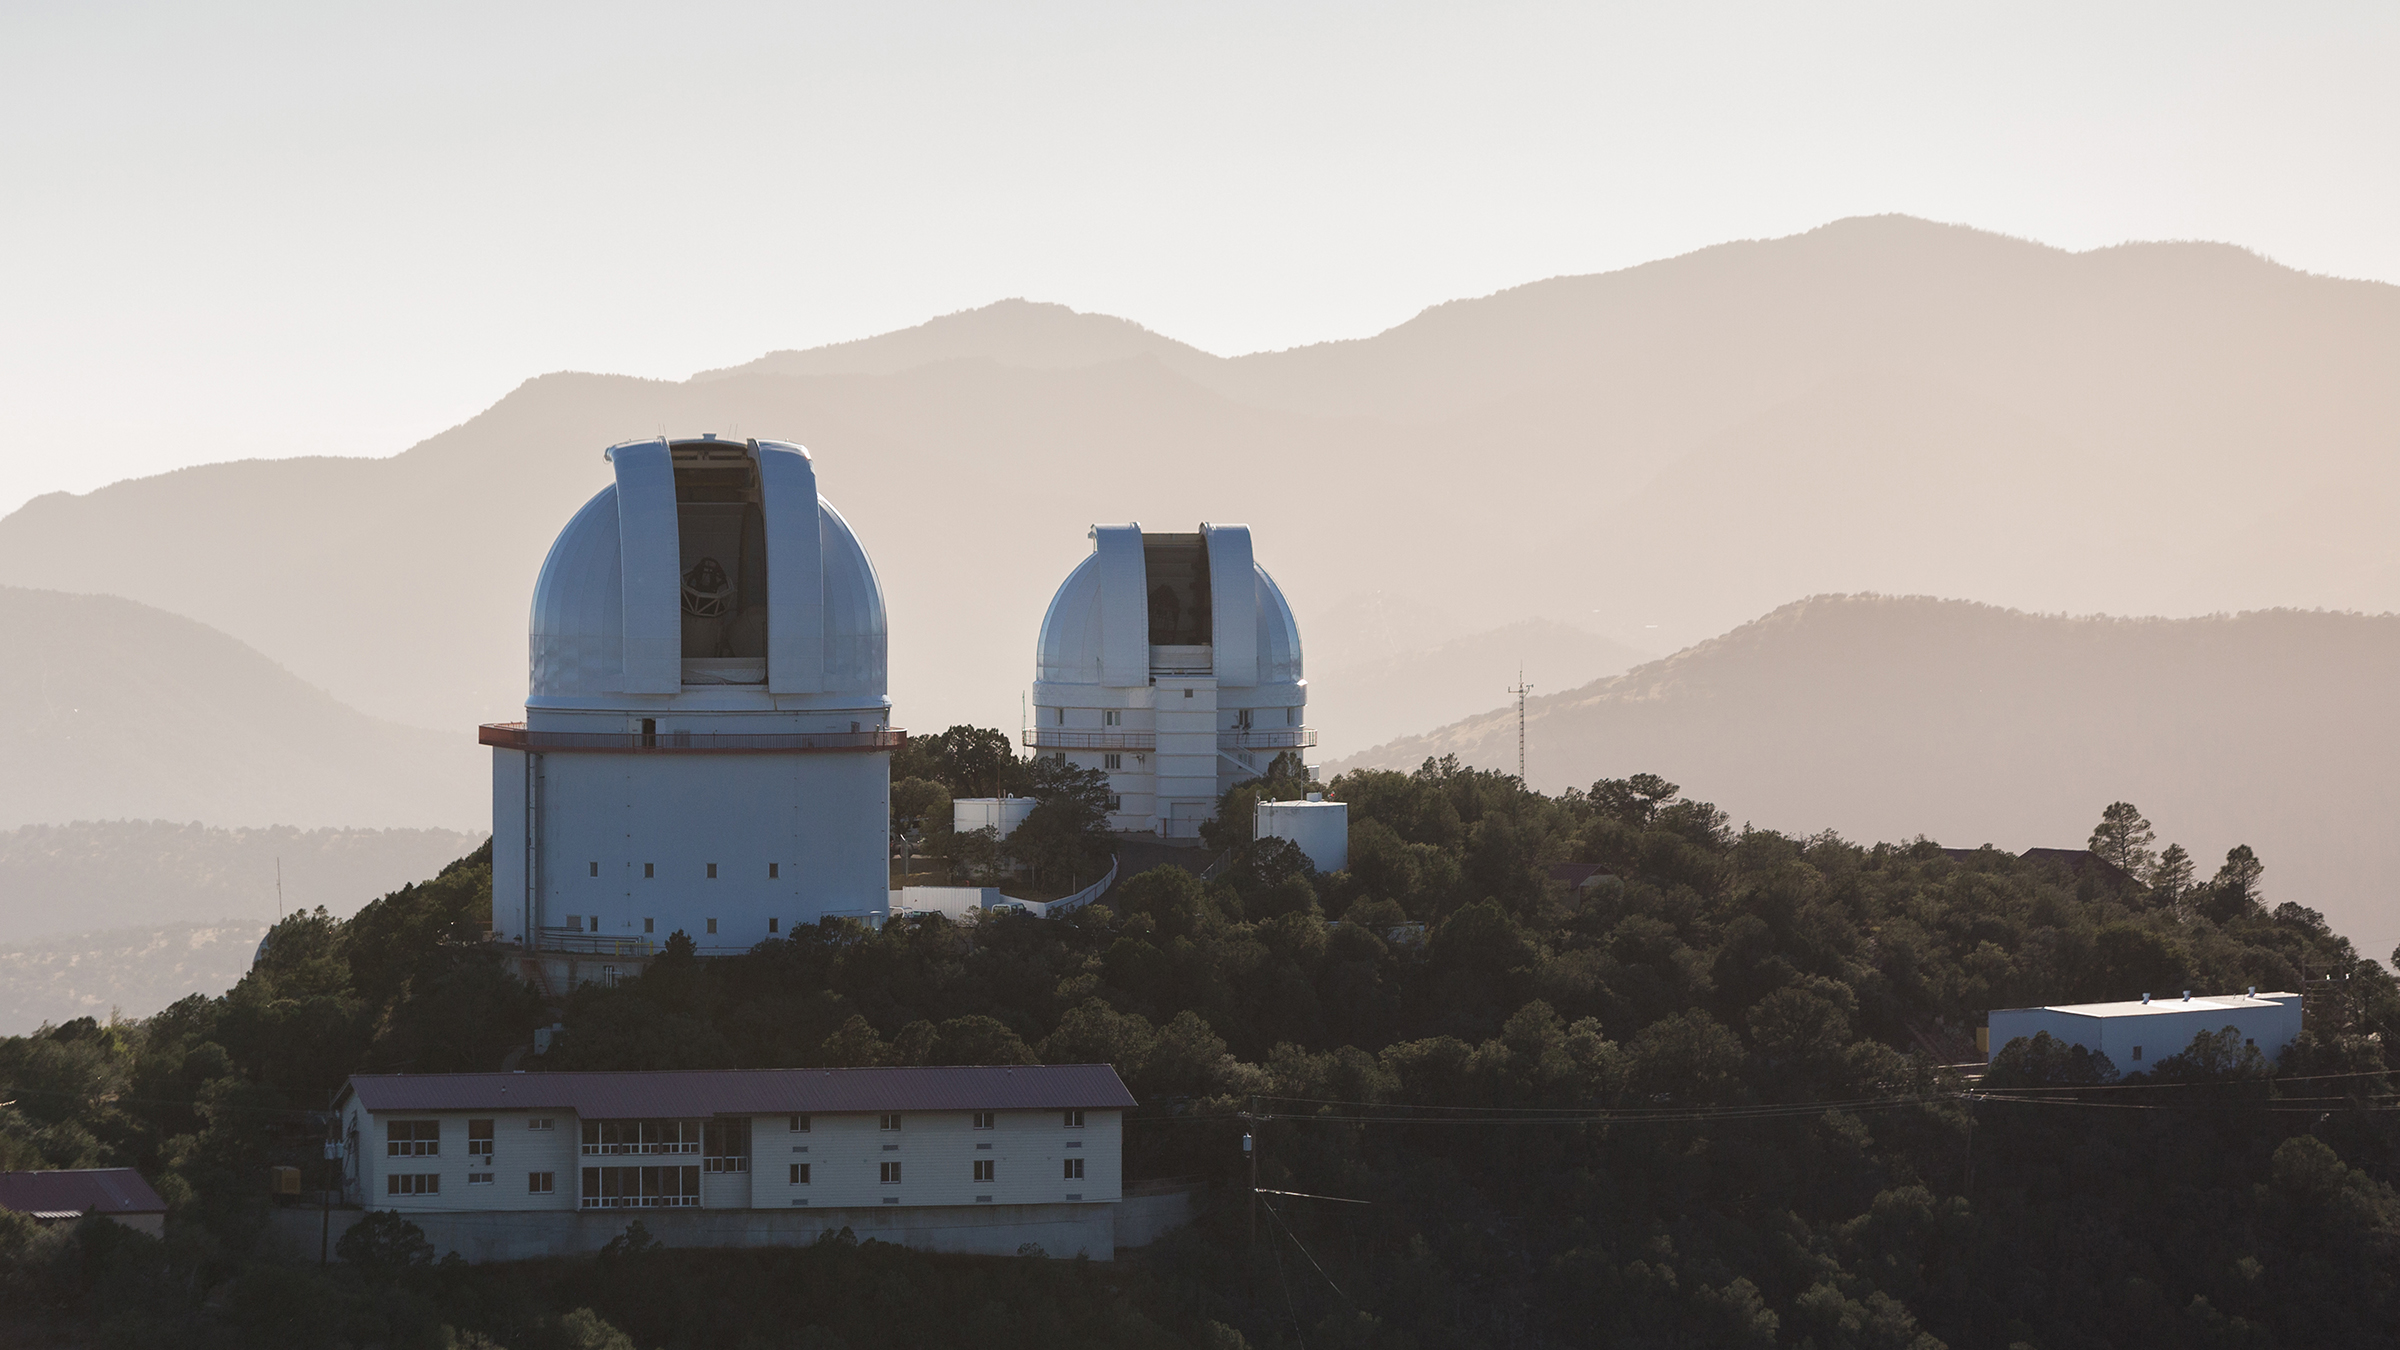 Two telescope domes sit atop a mountain with more peaks in the distance